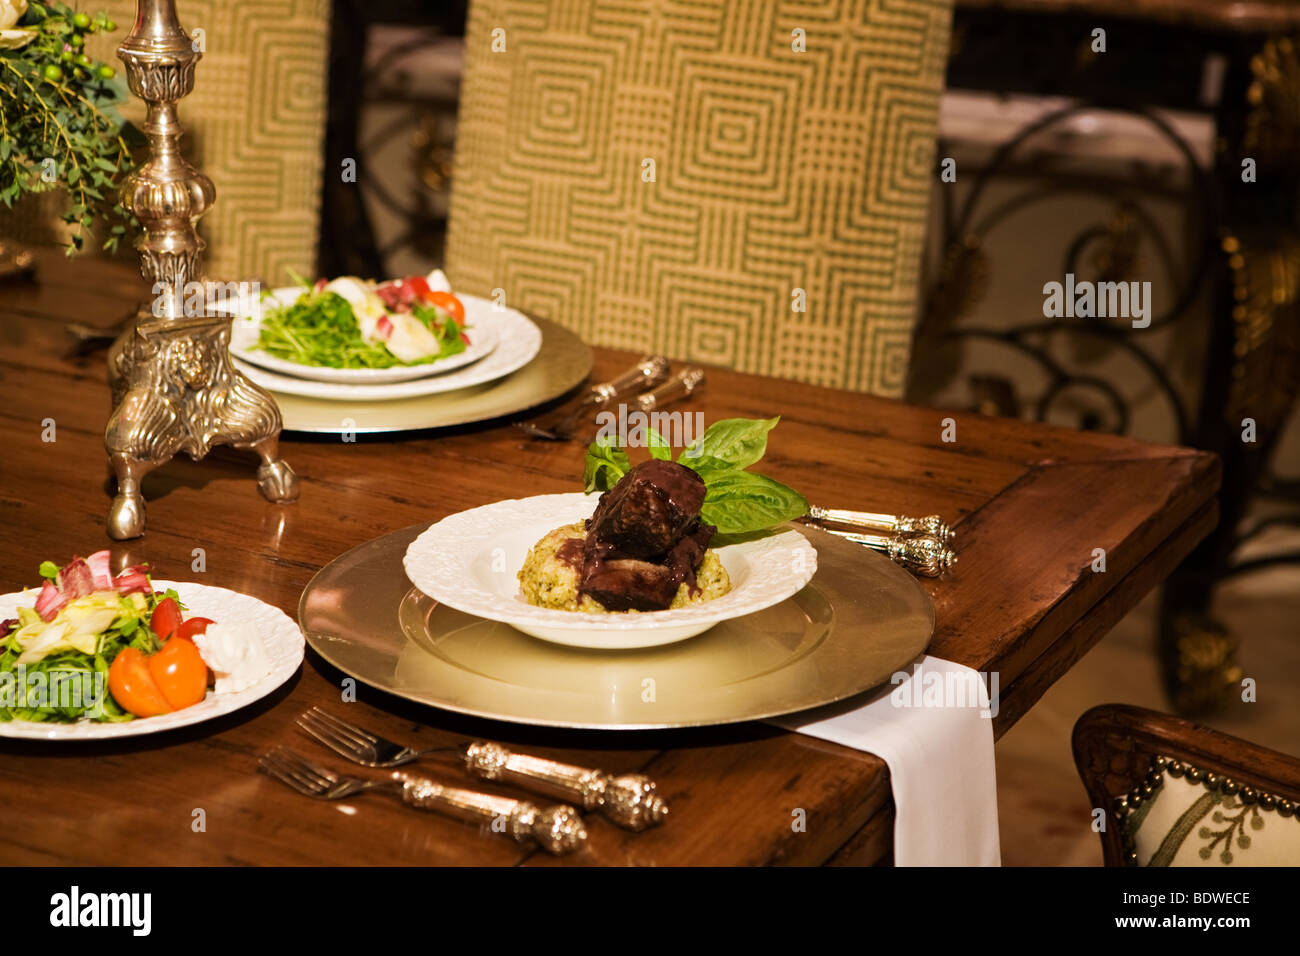 A luxurious place setting with food served Stock Photo